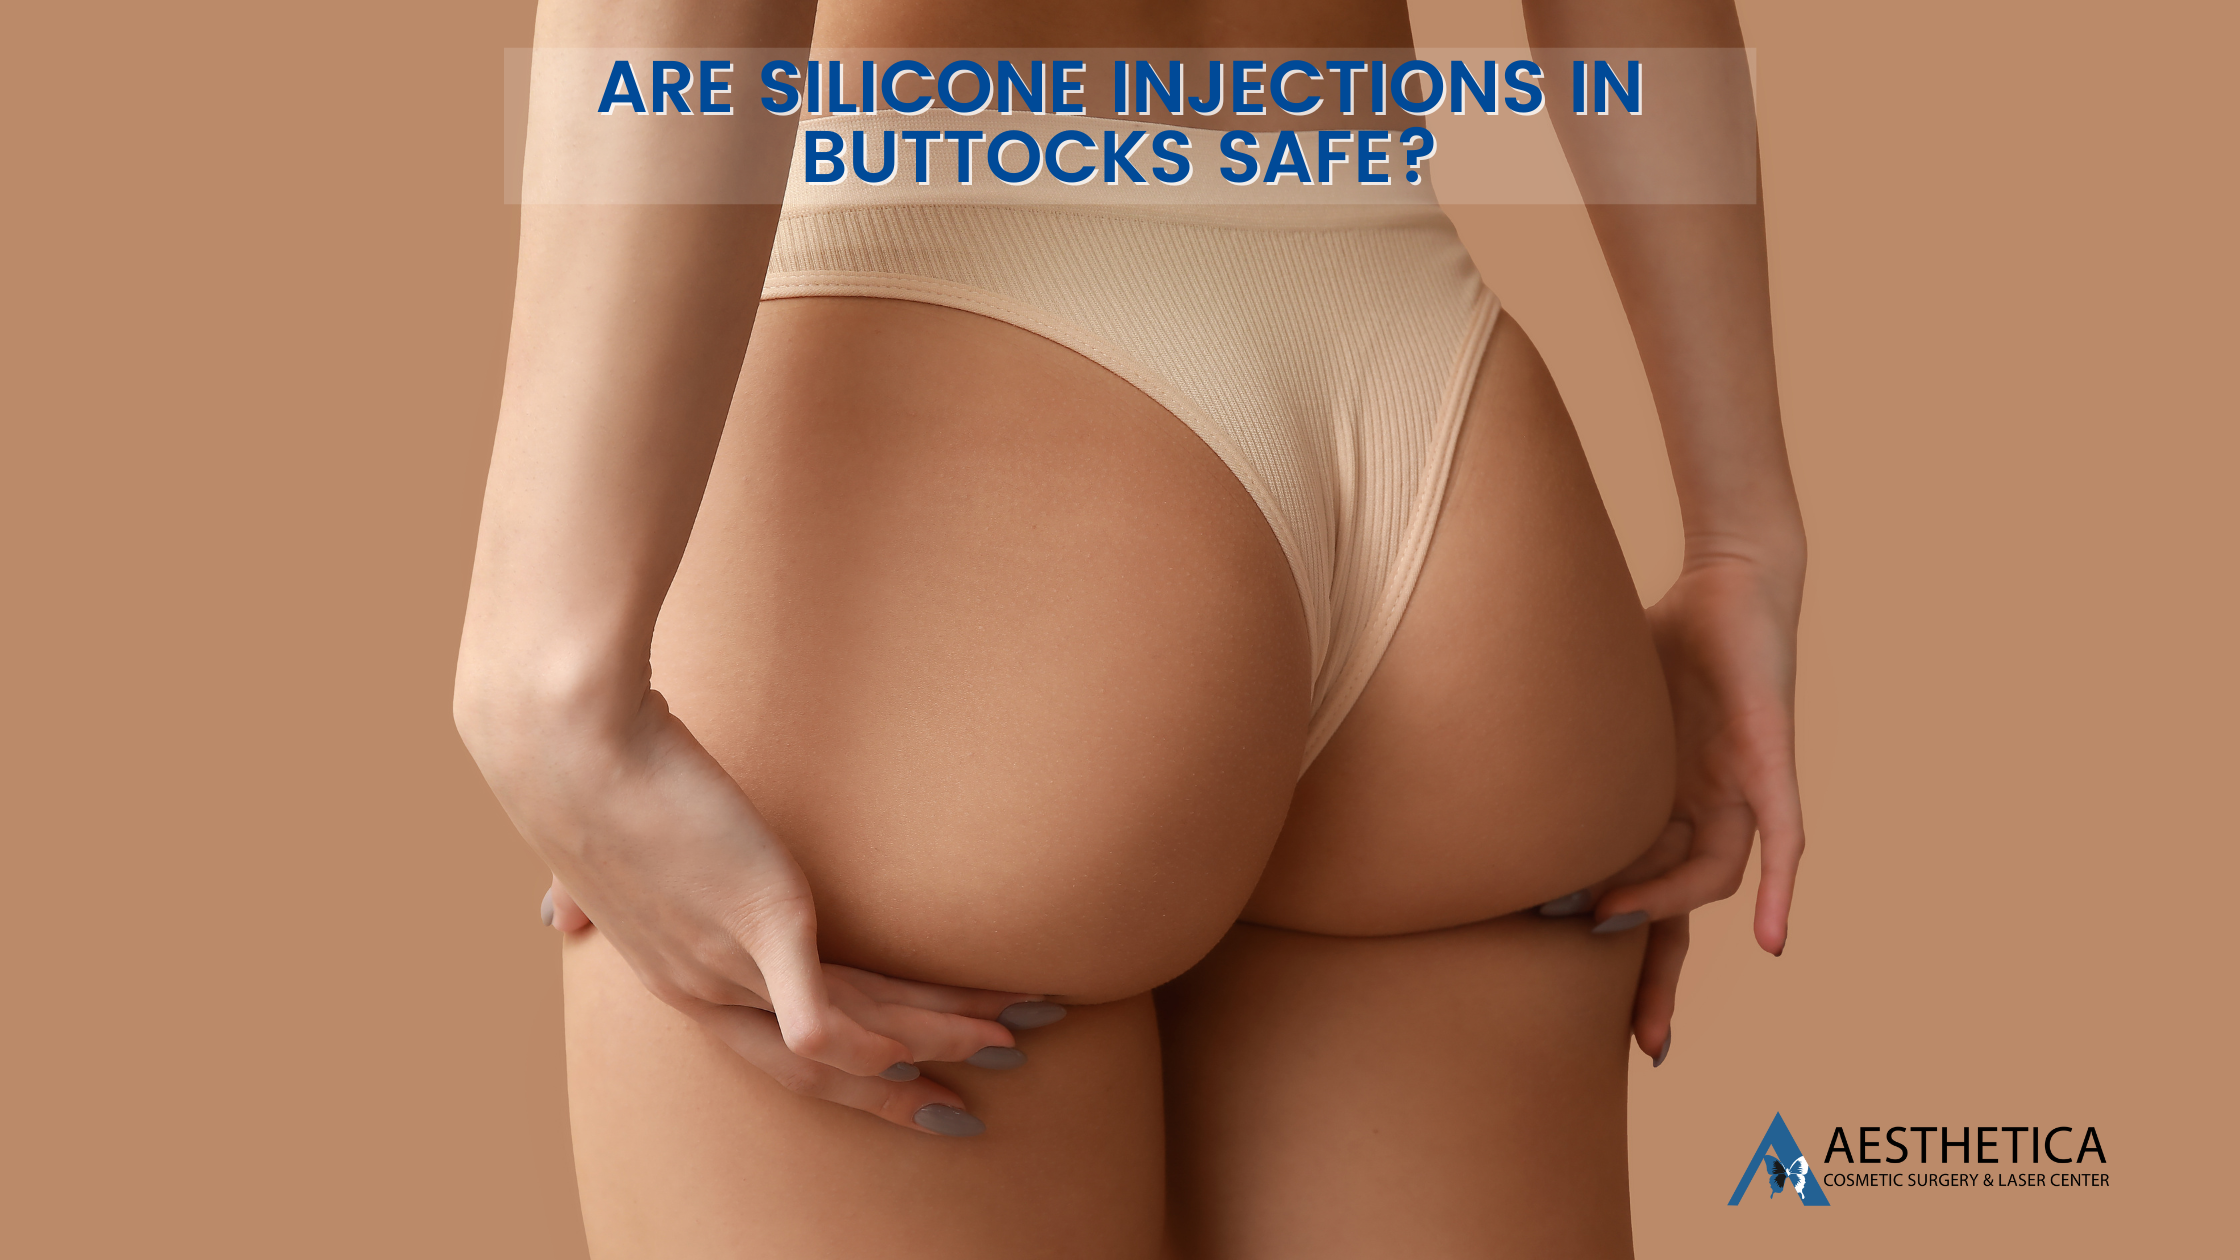 Are Silicone Injections in Buttocks Safe?